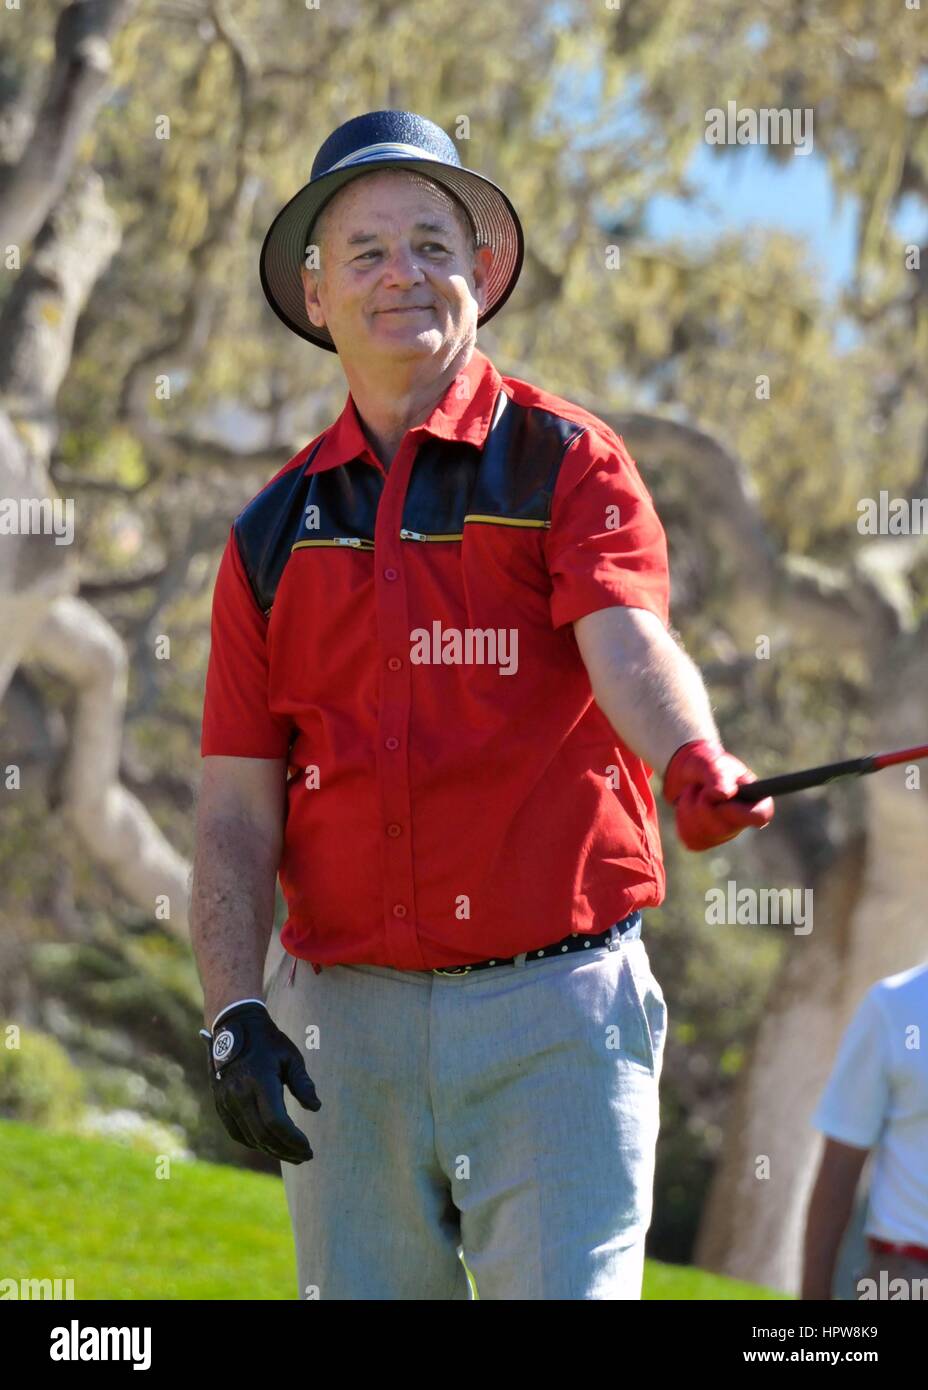 Actor and comedian Bill Murray during the AT&T Pebble Beach National Pro-Am golf tournament February 14, 2015 in Monterey, California. Stock Photo